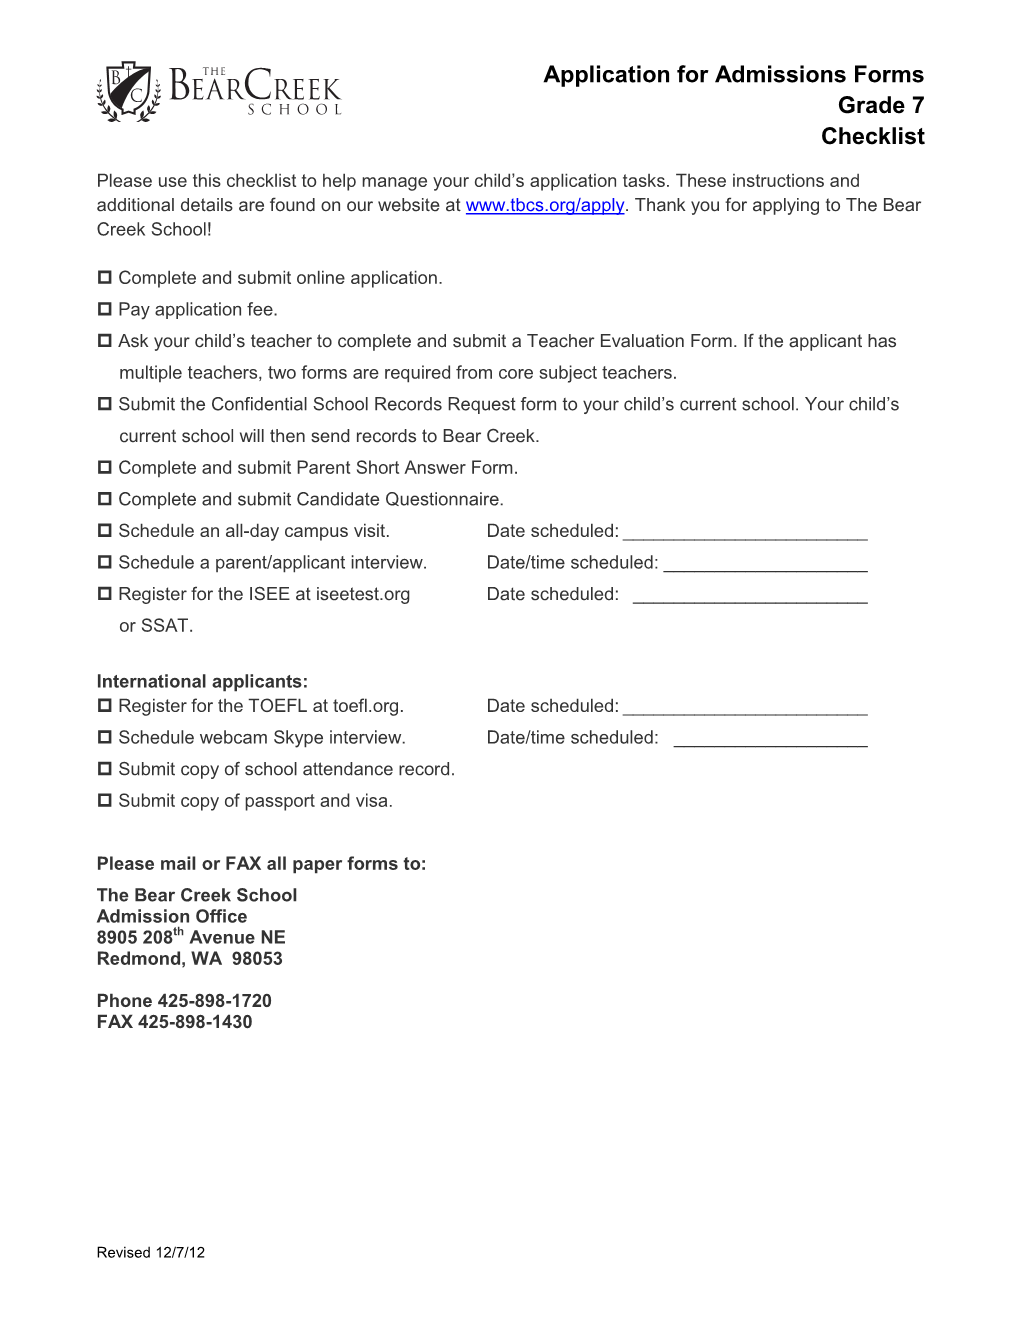 Application for Admissions Forms Grade 7 Checklist